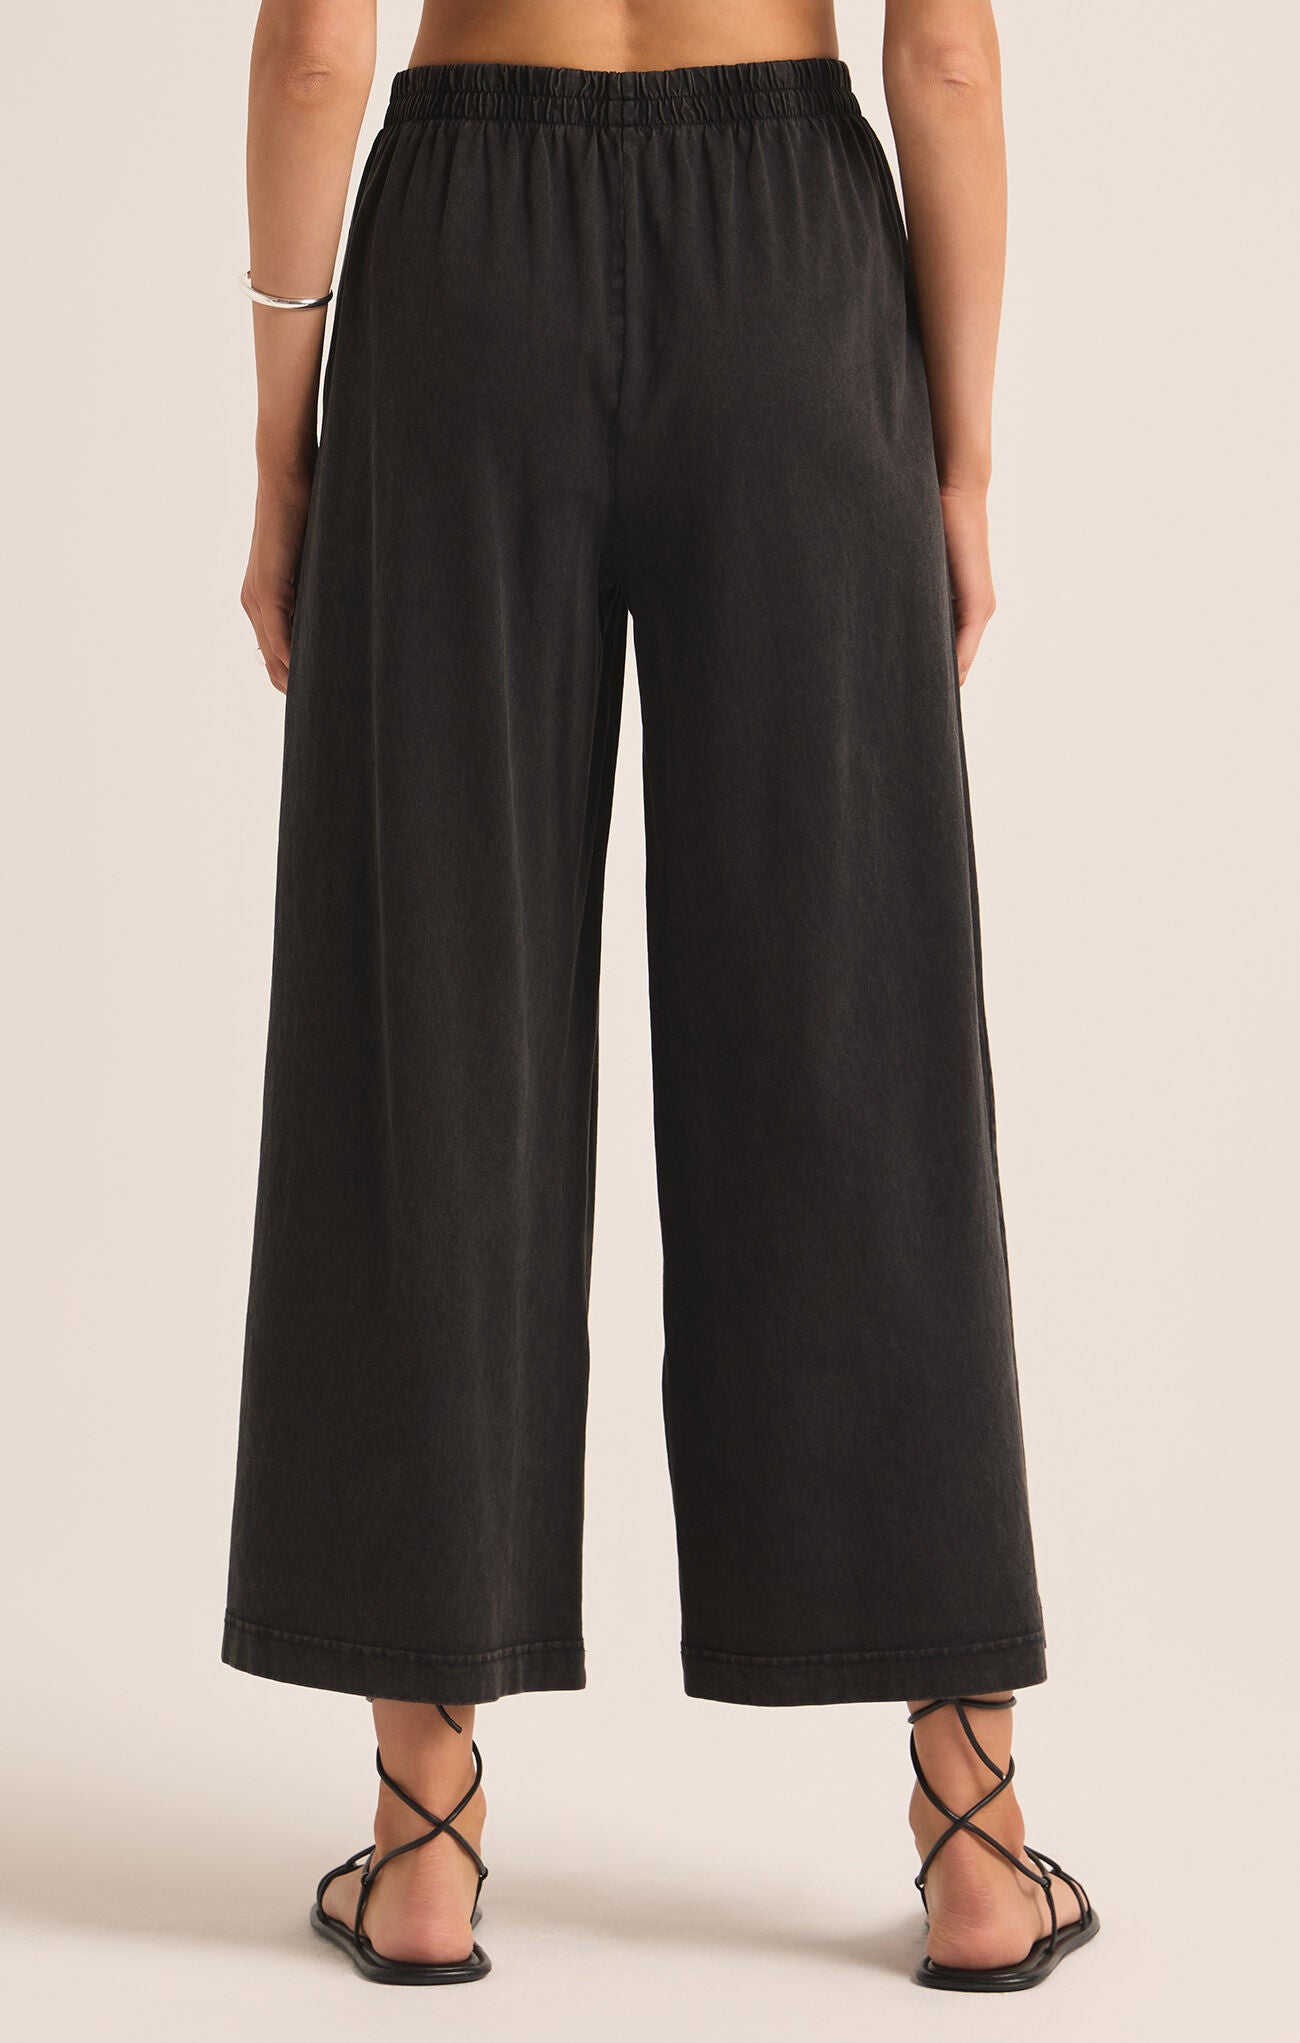 Scout Jersey Flare Pant - Black